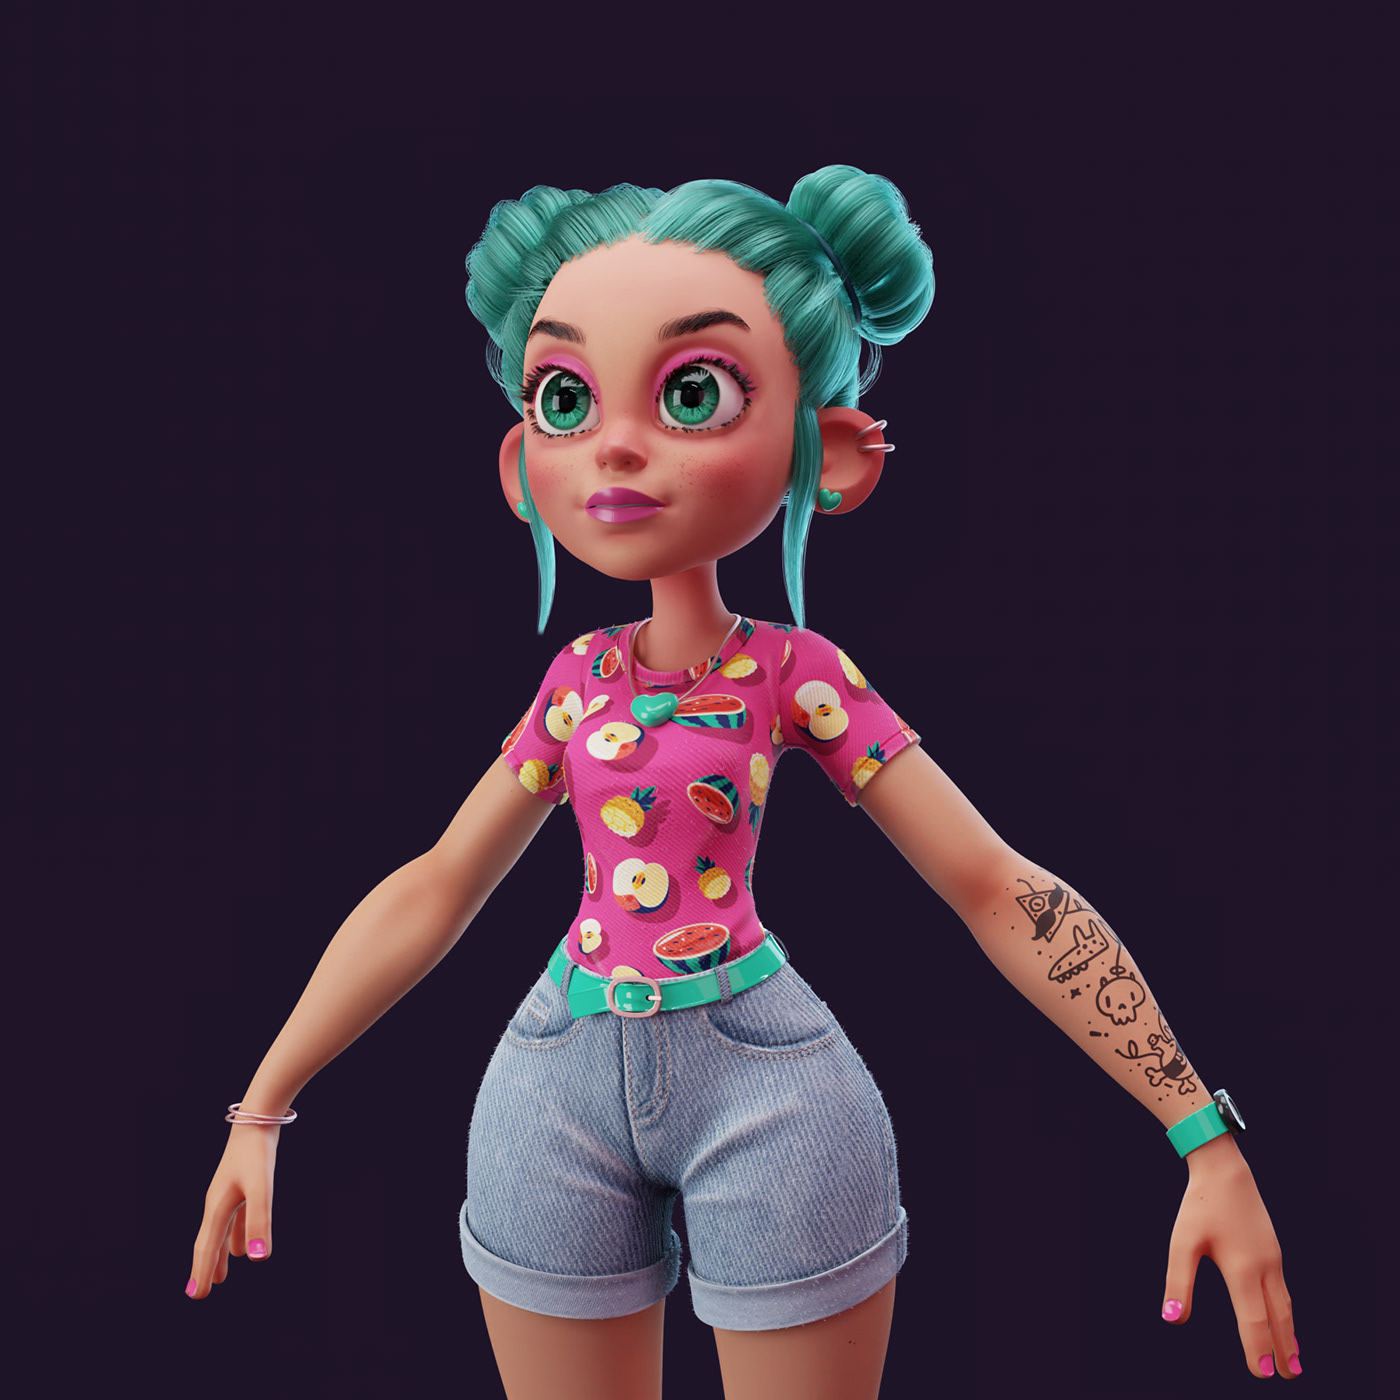 3D blender Character Character design  cycles LONGBOARD modeling sculpting  Substance Painter